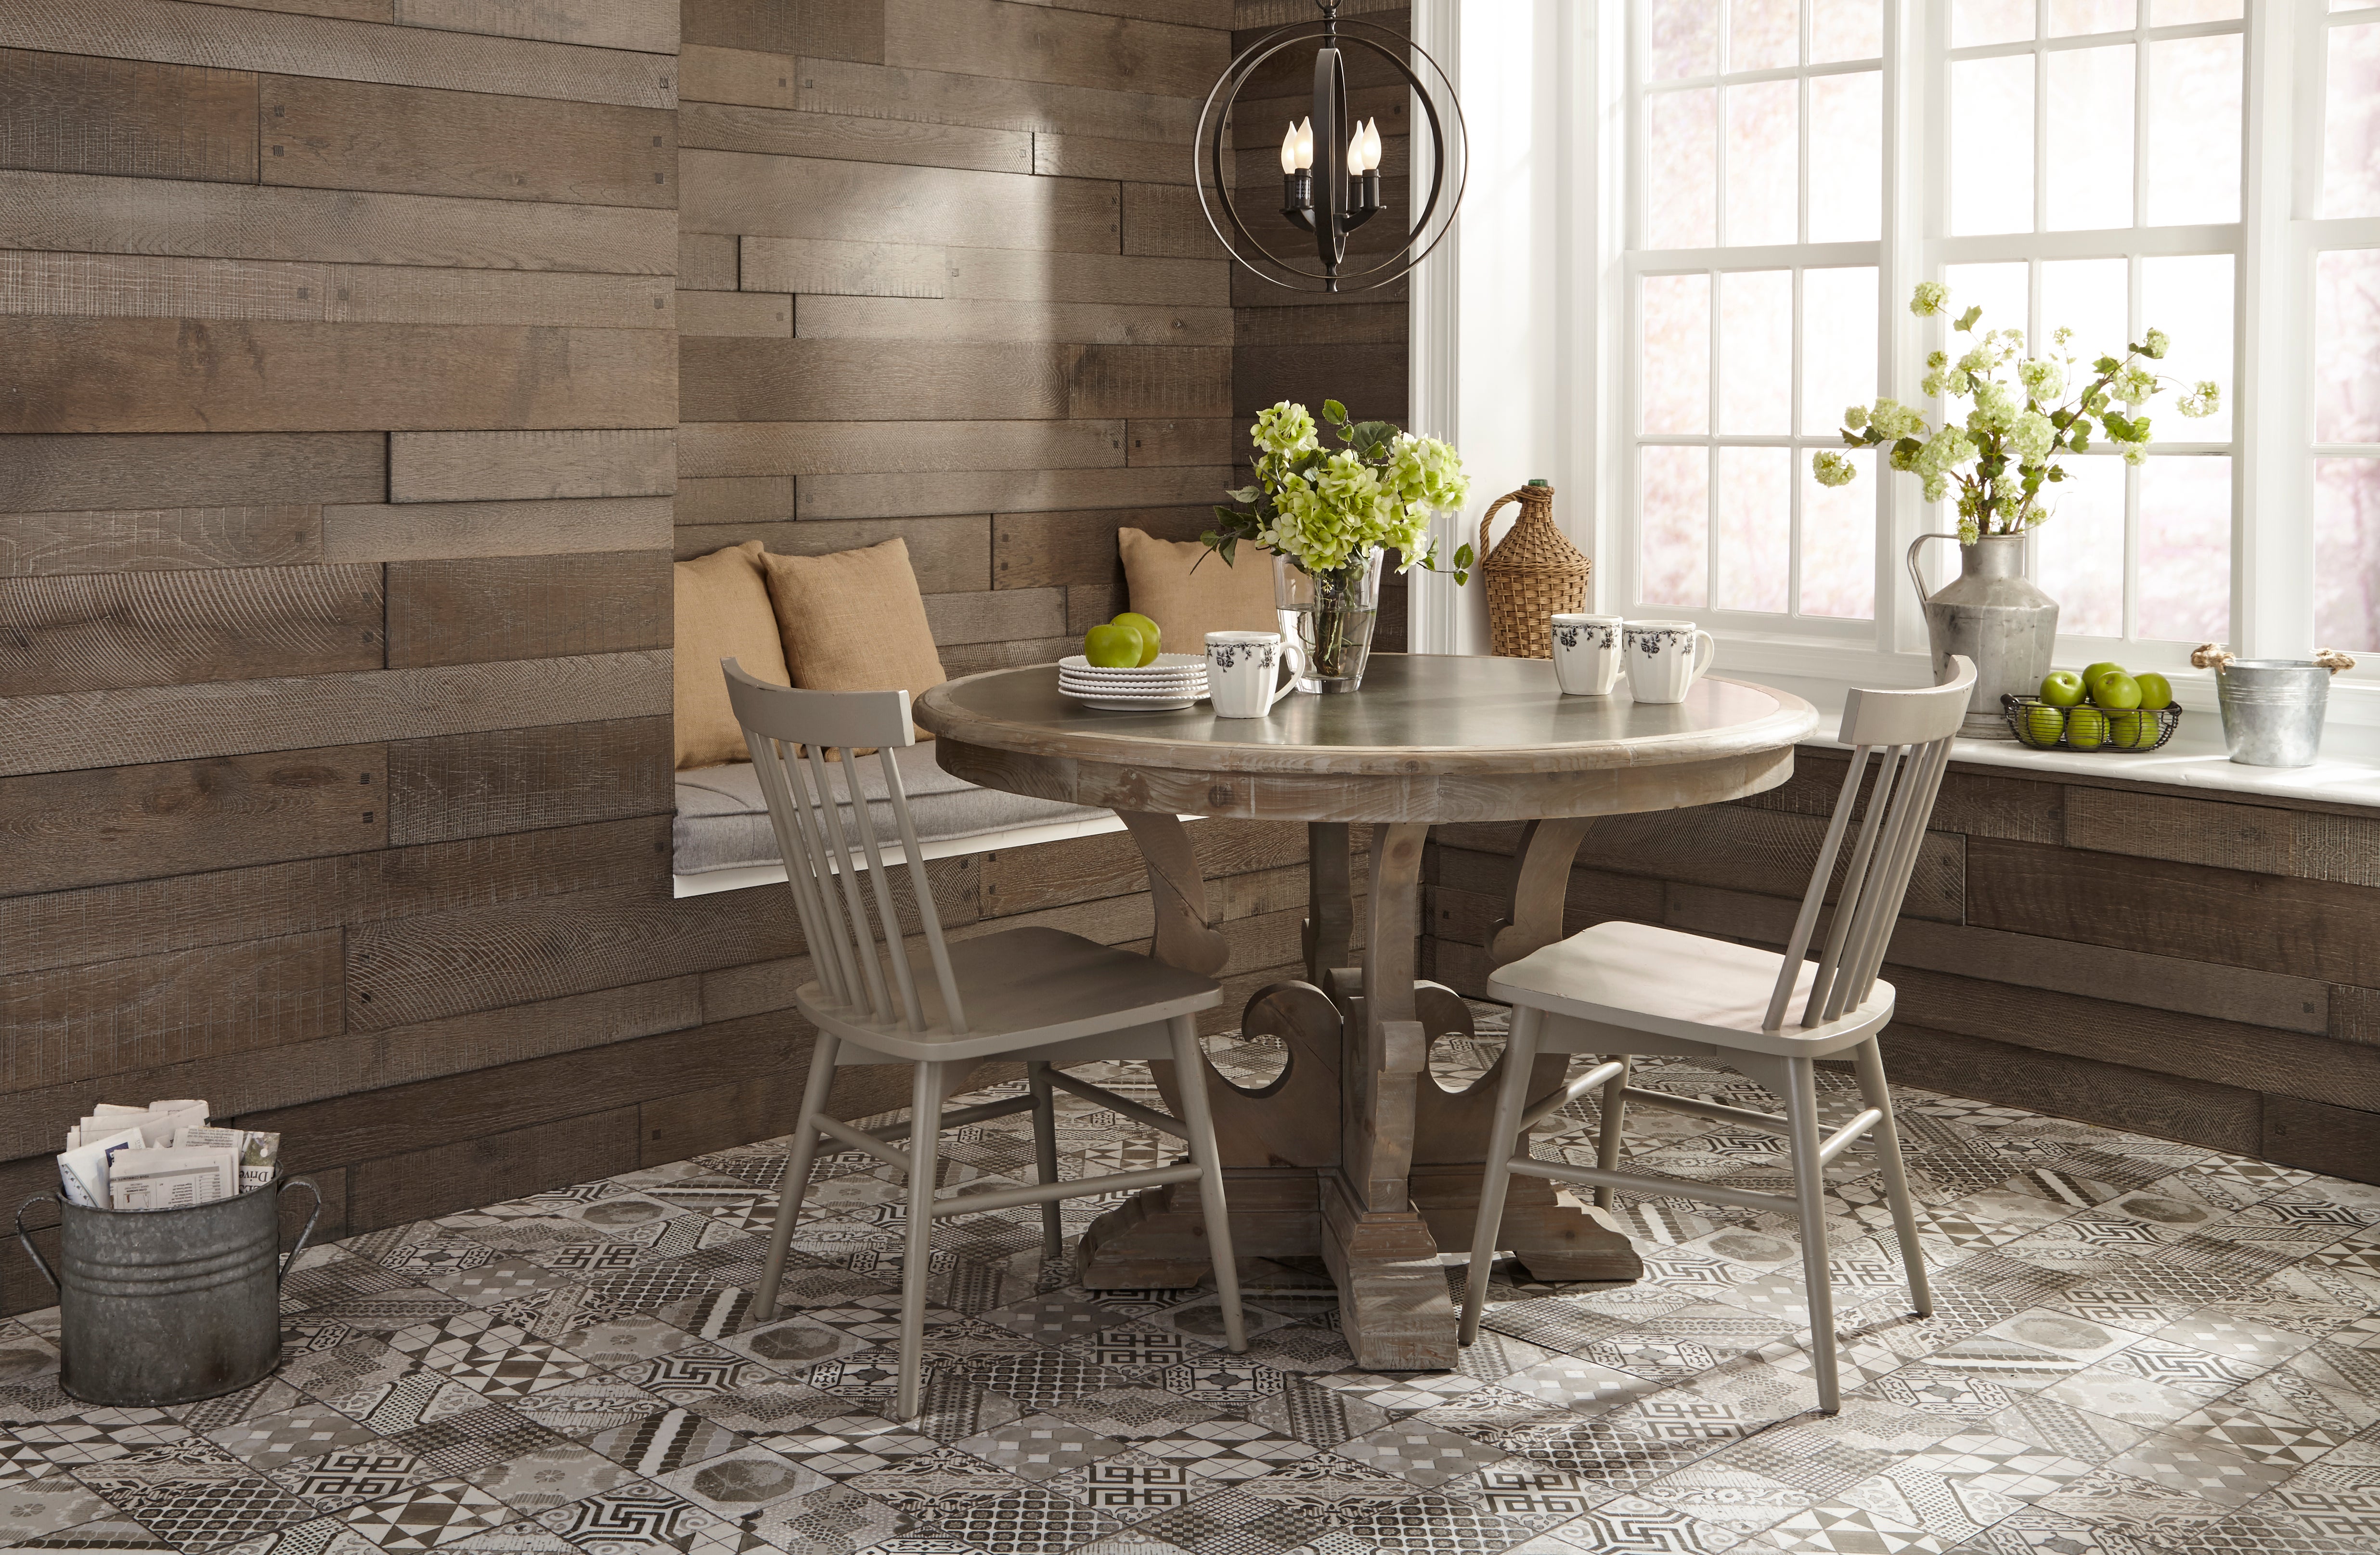 Farmhouse style breakfast nook with porcelain tile floors and oak wall paneling.